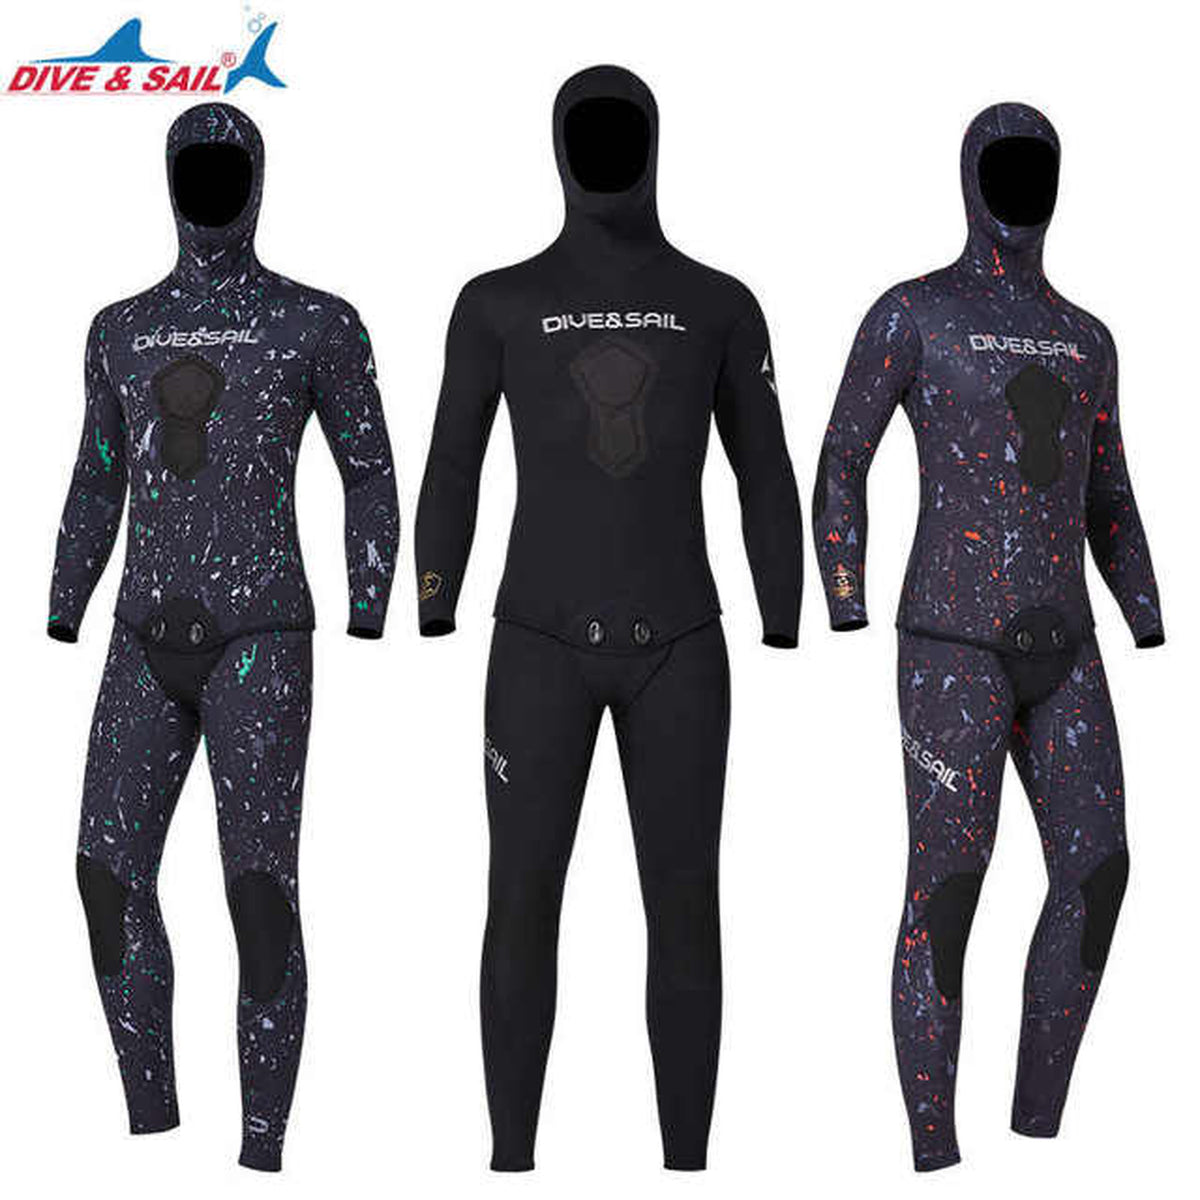 Epsealon Shadow spearfishing wetsuit 5 mm - Nootica - Water